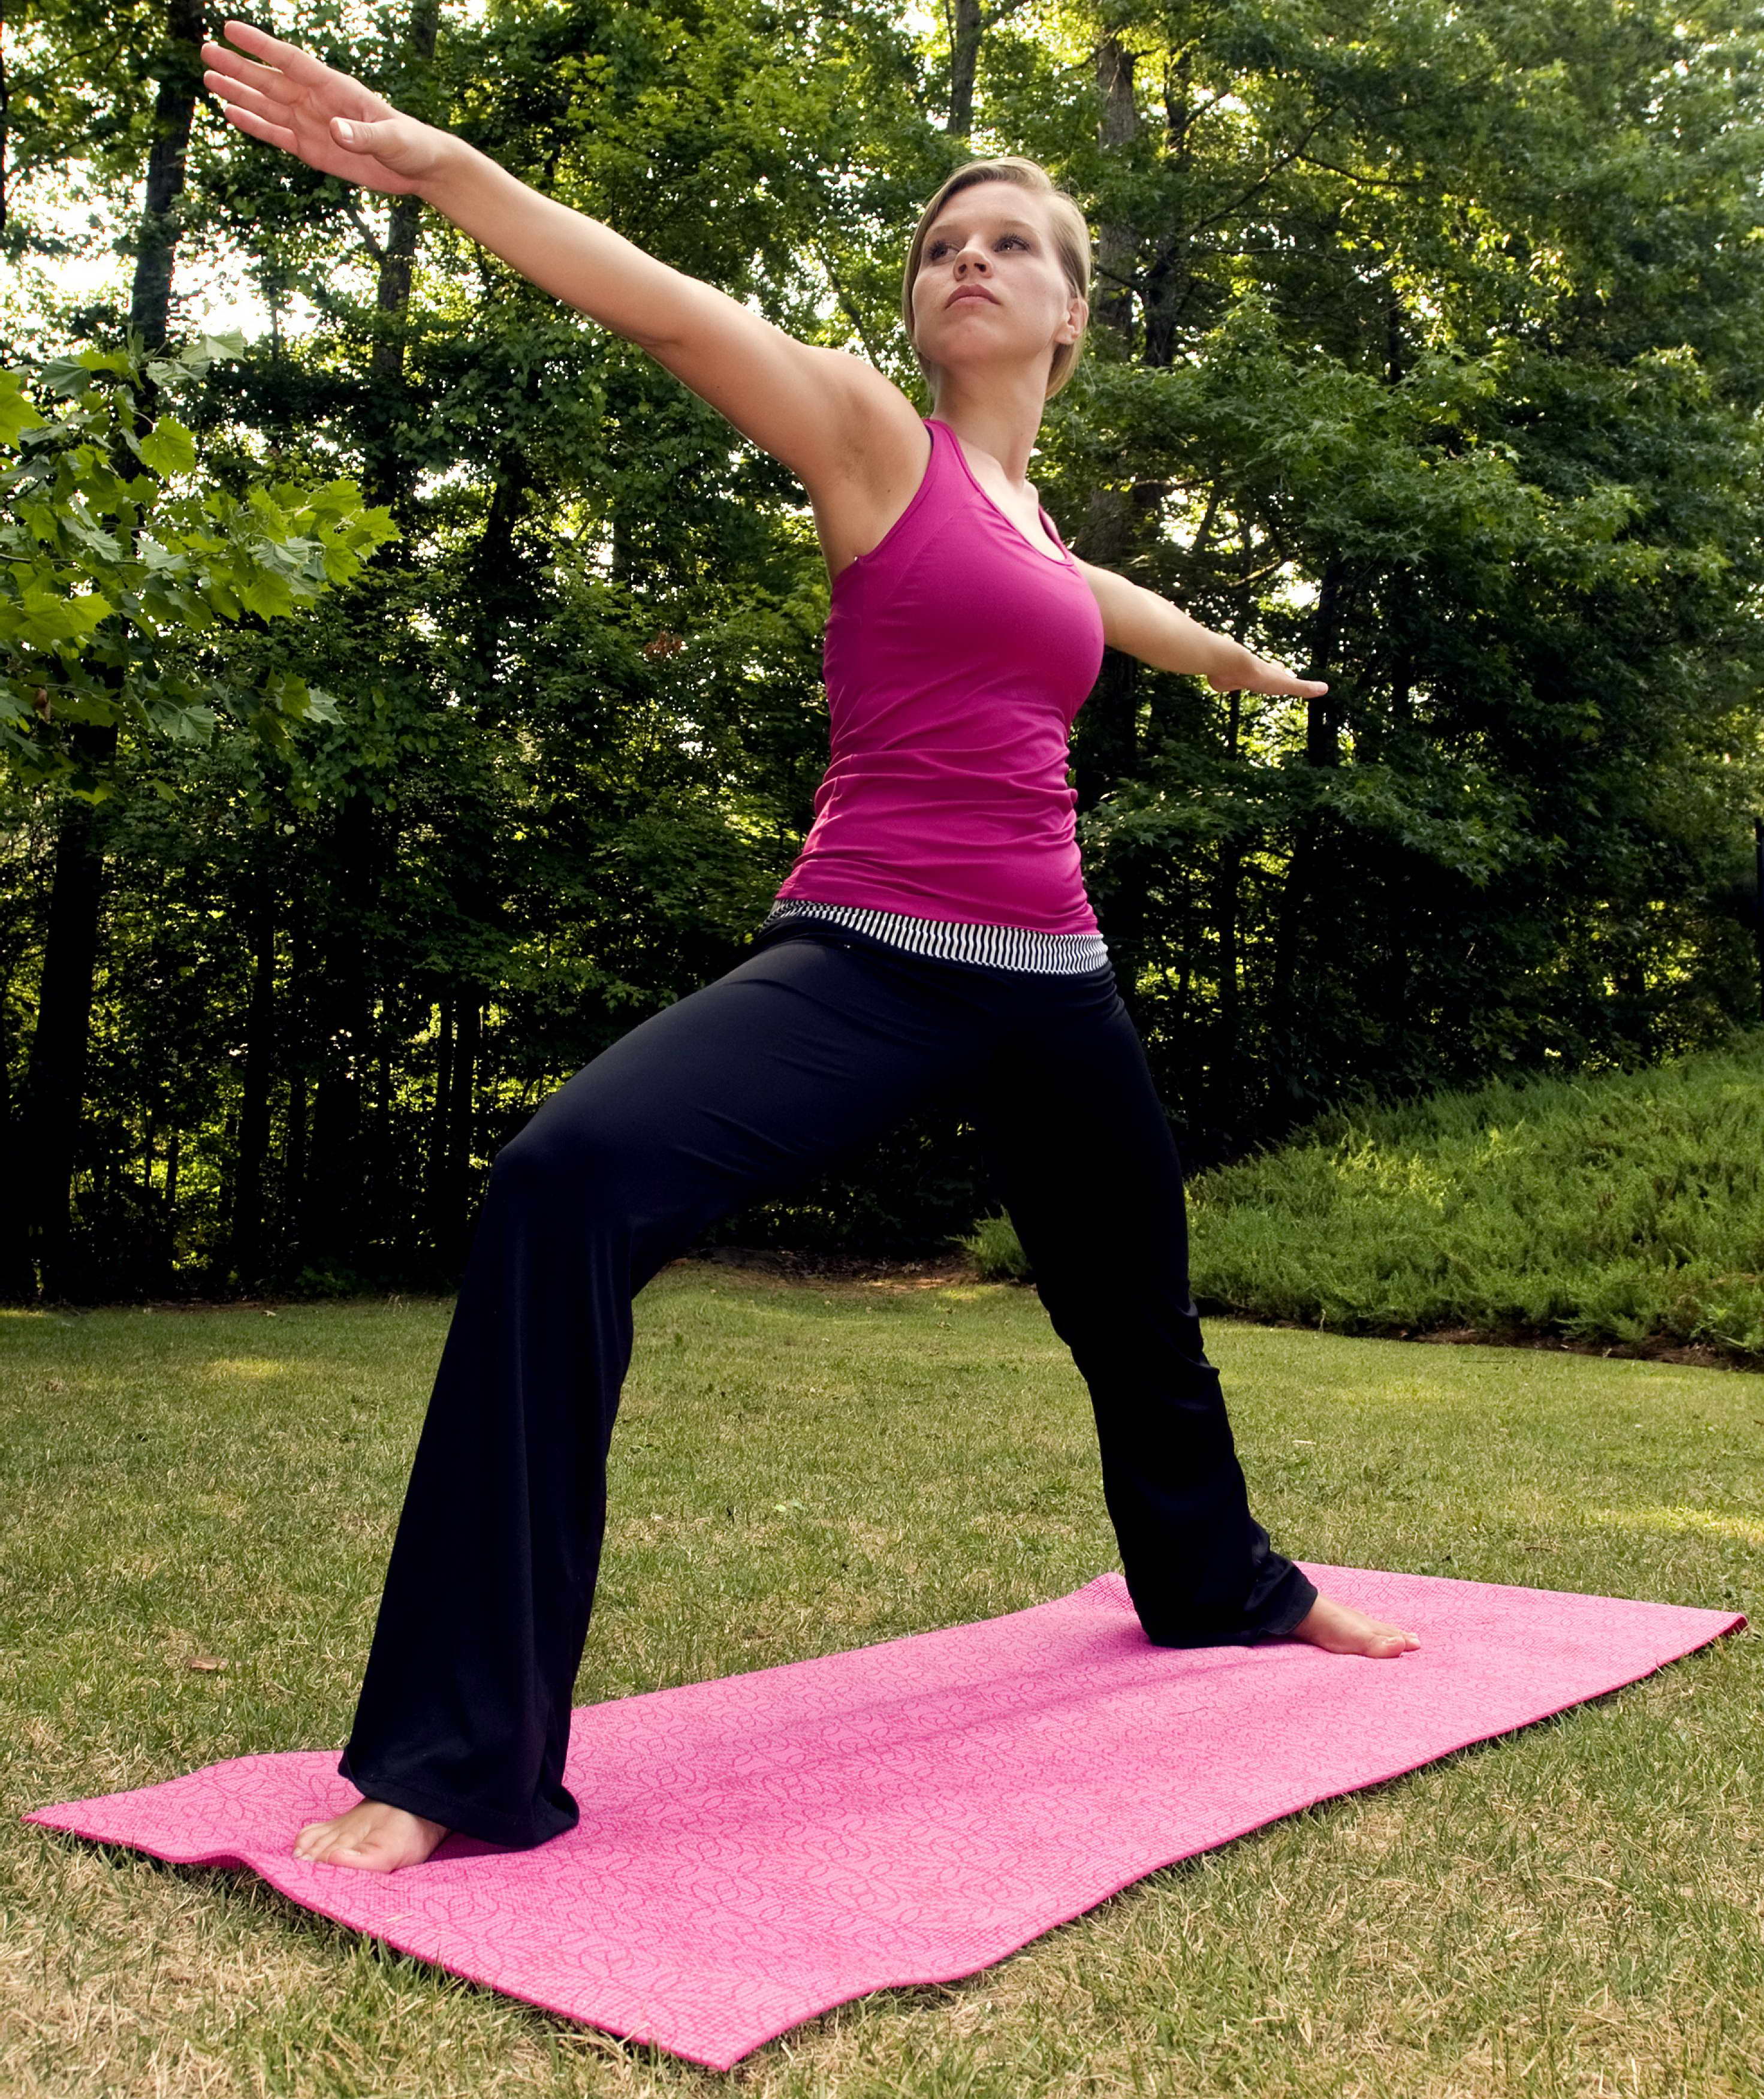 Free picture: woman, exercise, practicing, yoga, poses